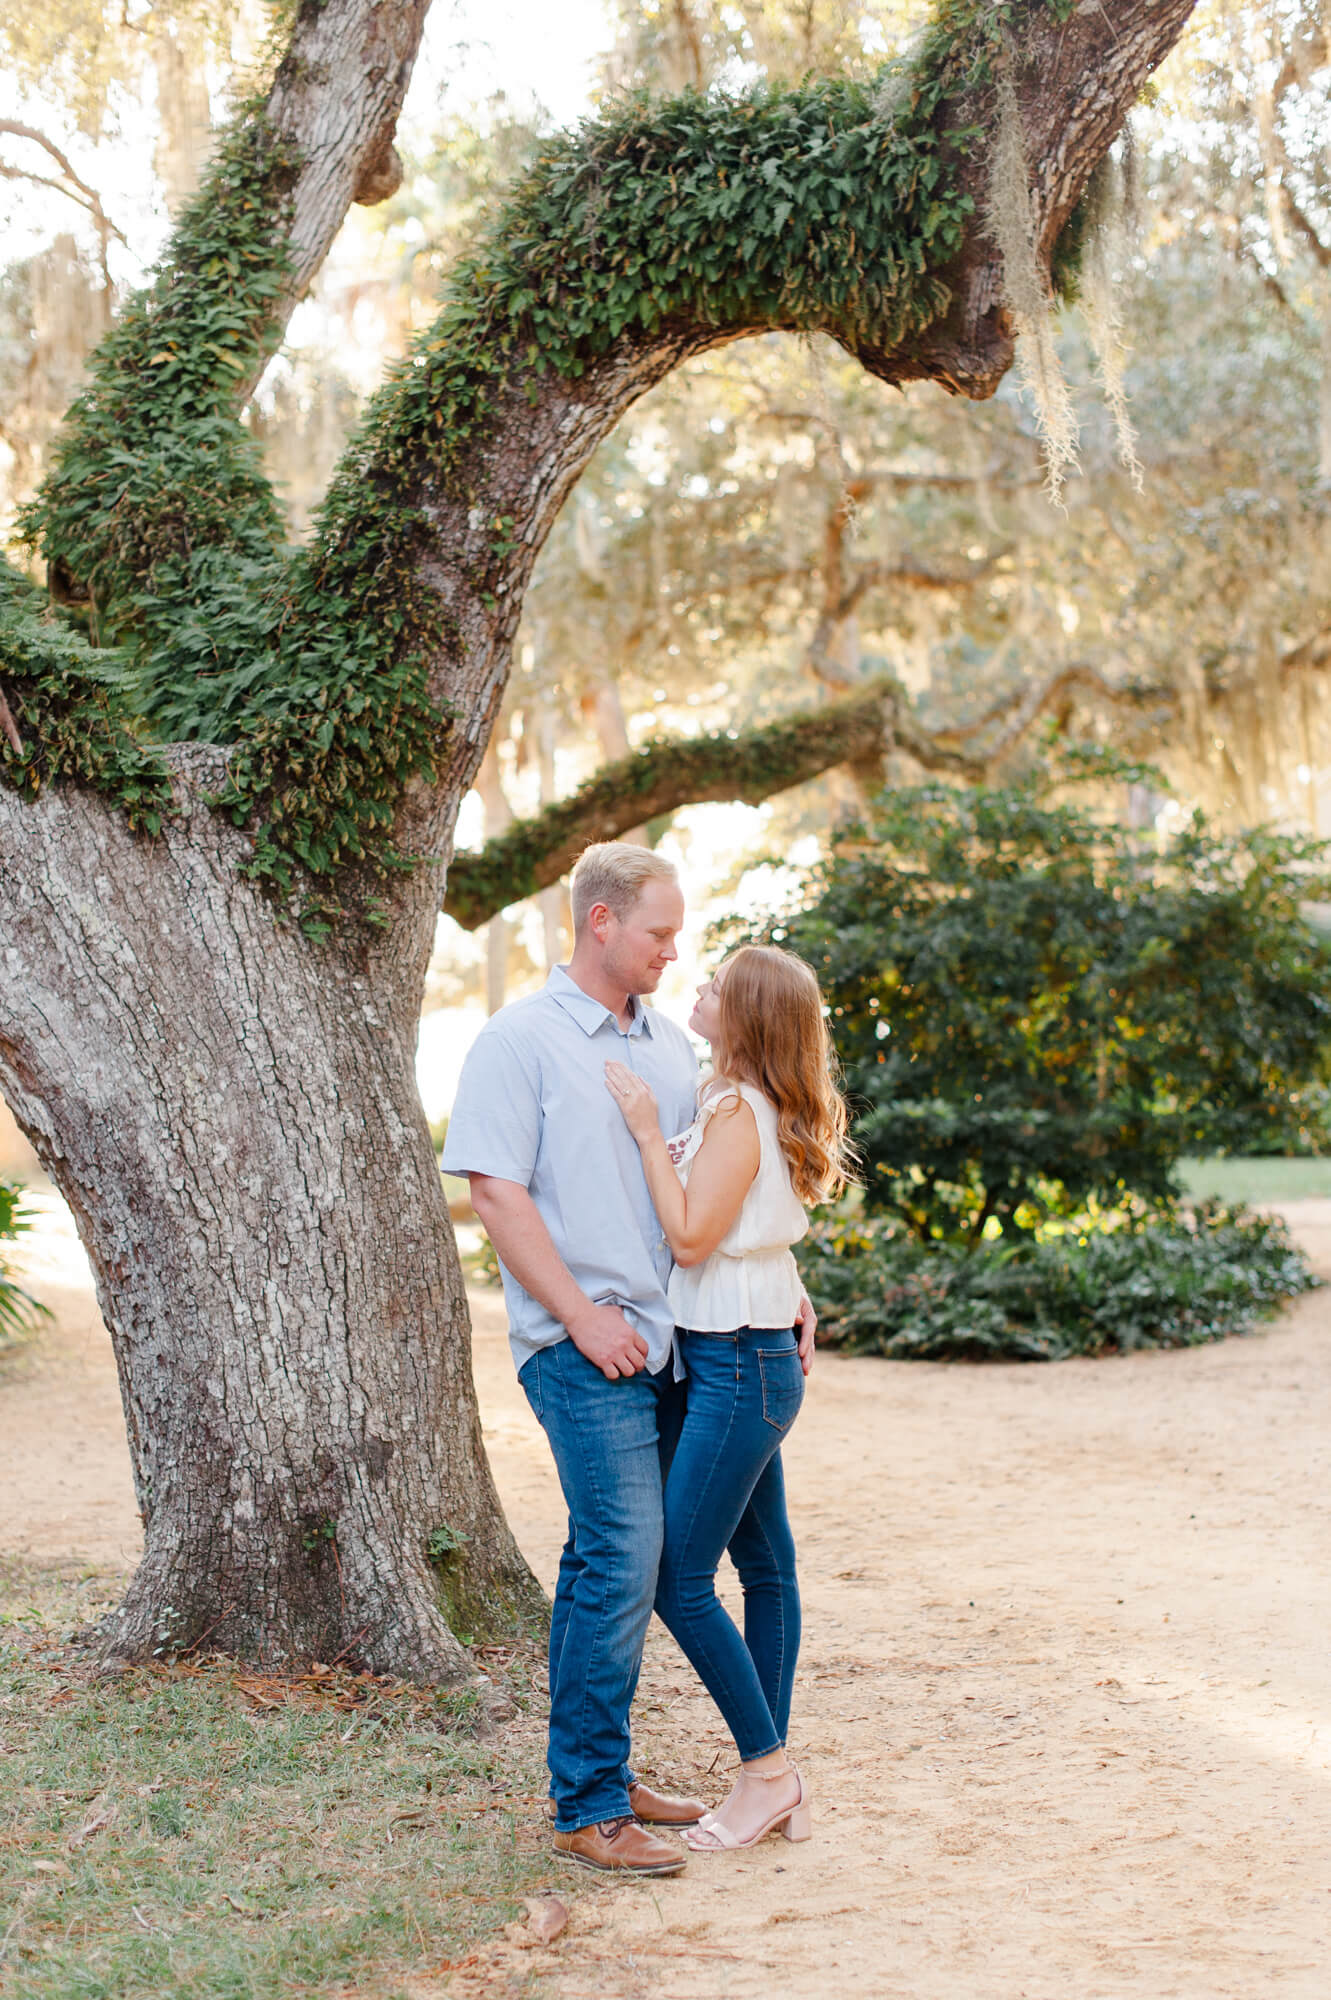 Couple stands near an old oak tree covered in greenery embracing each other with the sun setting behind them.